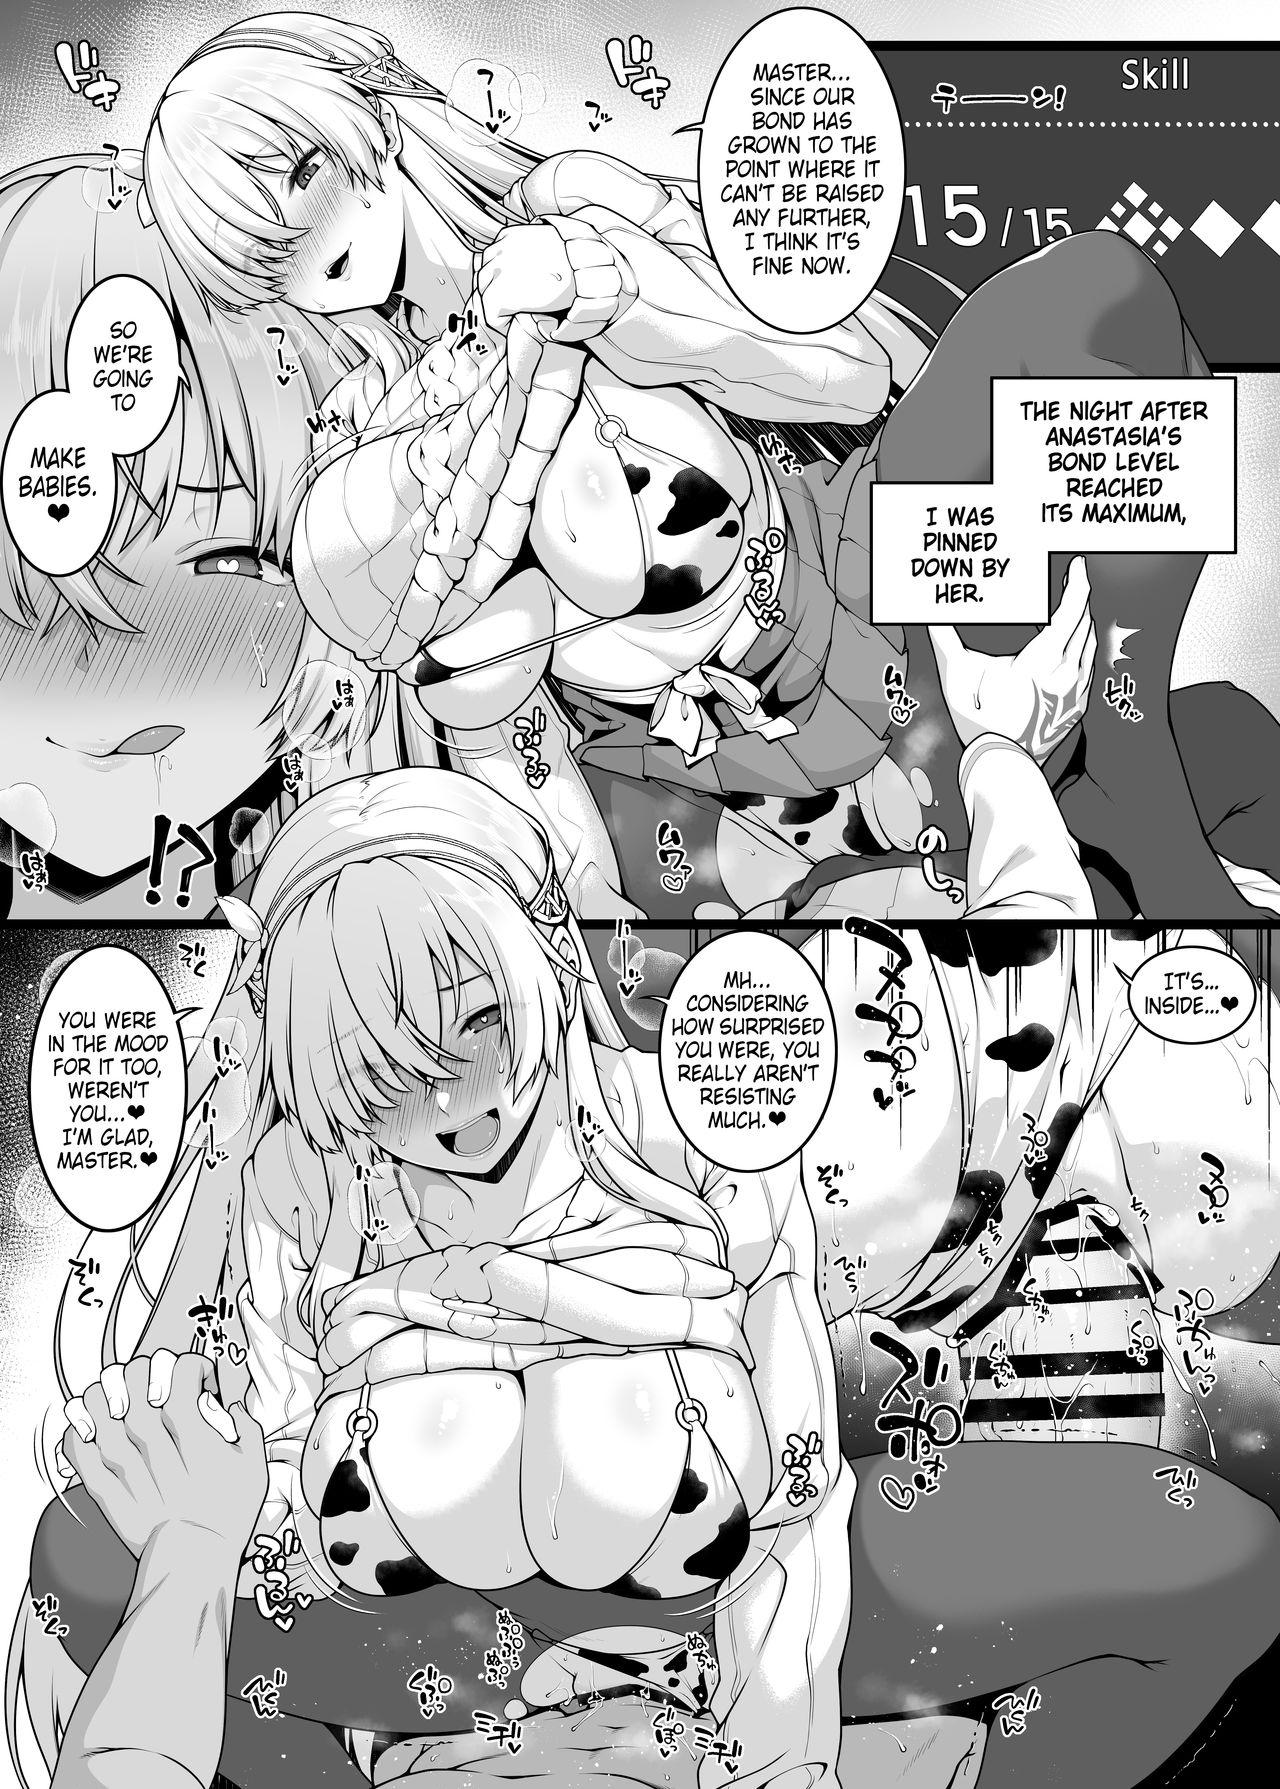 European Porn Having Lovey-Dovey Baby Making Sex With Anastasia - Fate grand order Solo Girl - Page 1